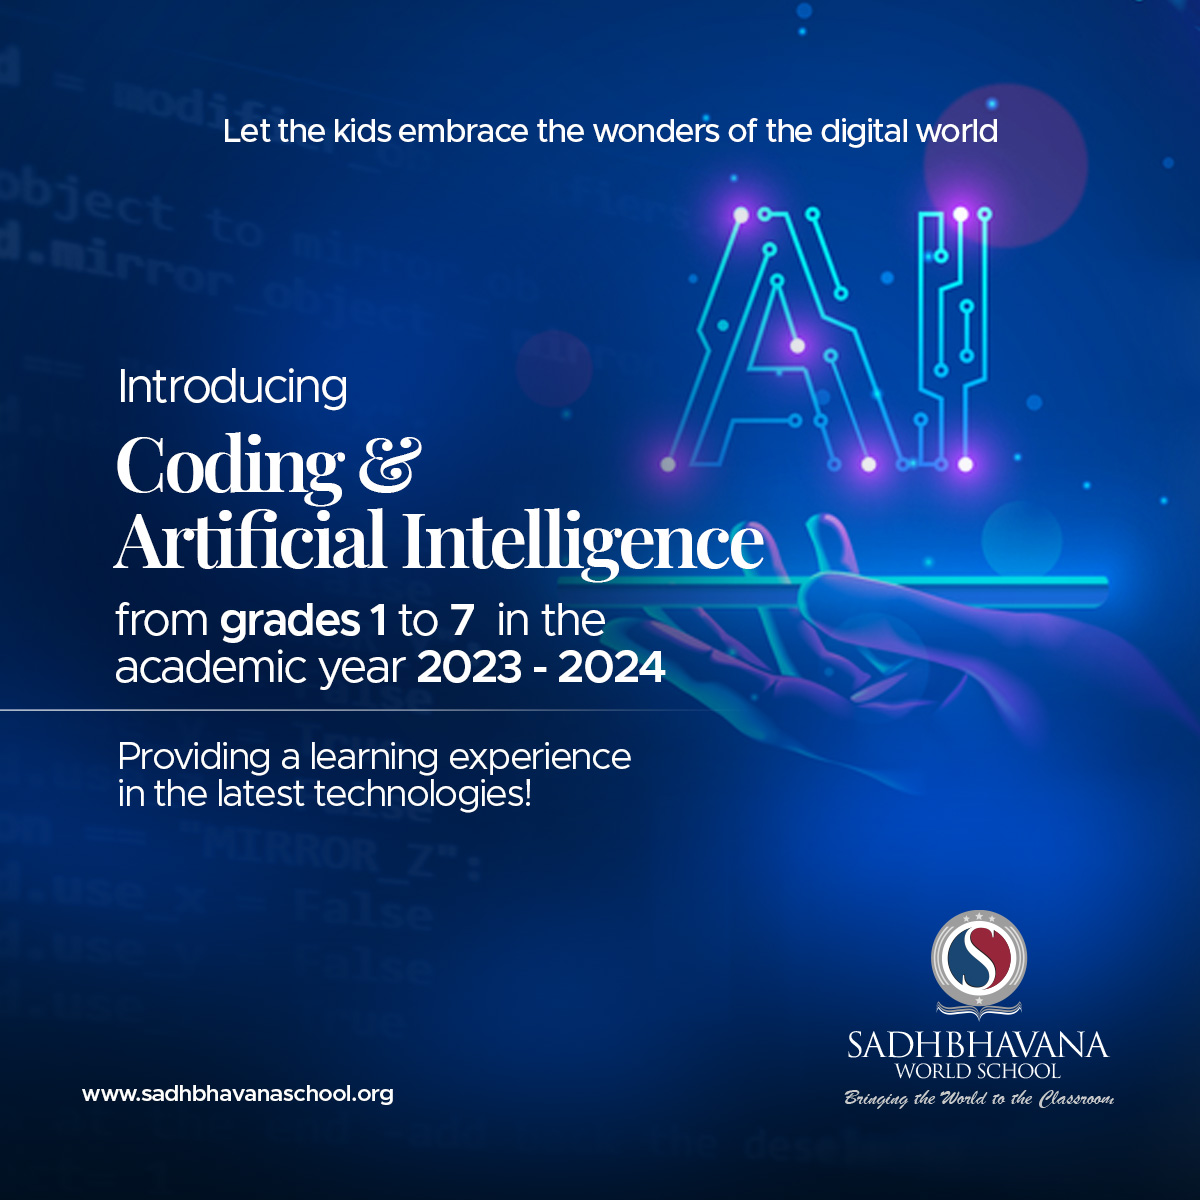 Coding & Artificial Intelligence 